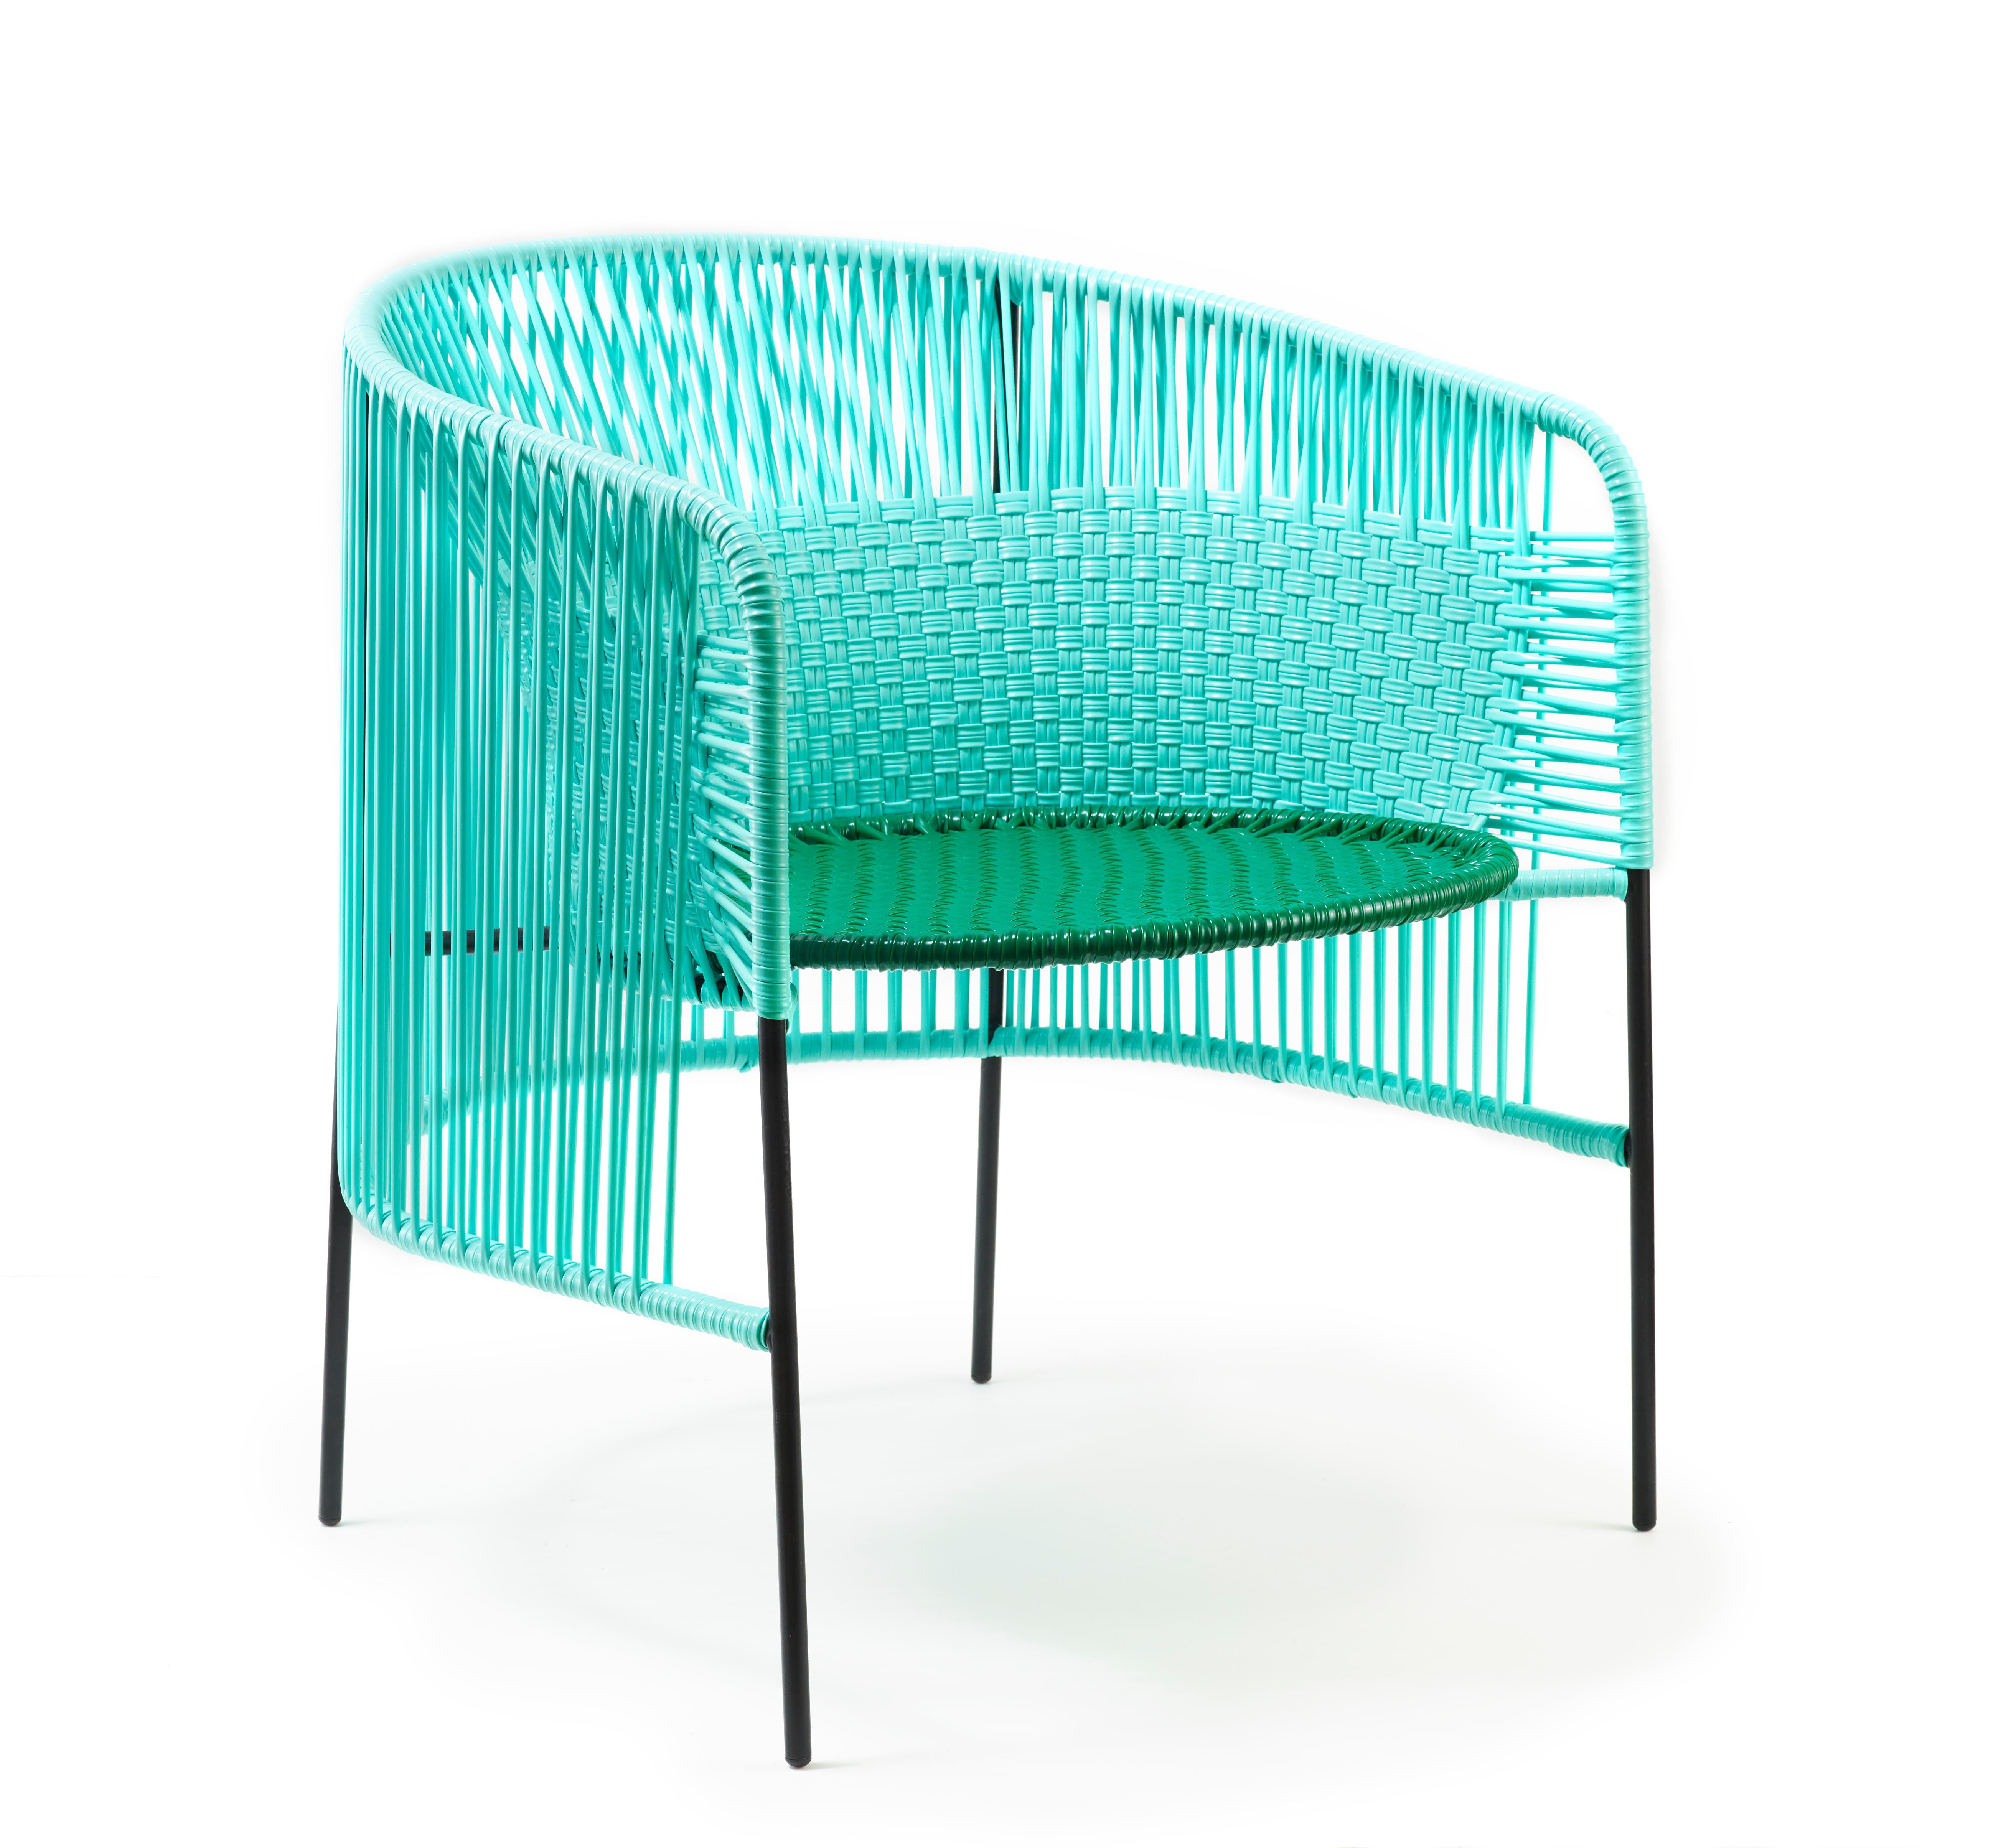 Set of 4 mint caribe lounge chair by Sebastian Herkner
Materials: galvanized and powder-coated tubular steel. PVC strings are made from recycled plastic.
Technique: made from recycled plastic and weaved by local craftspeople in Colombia.